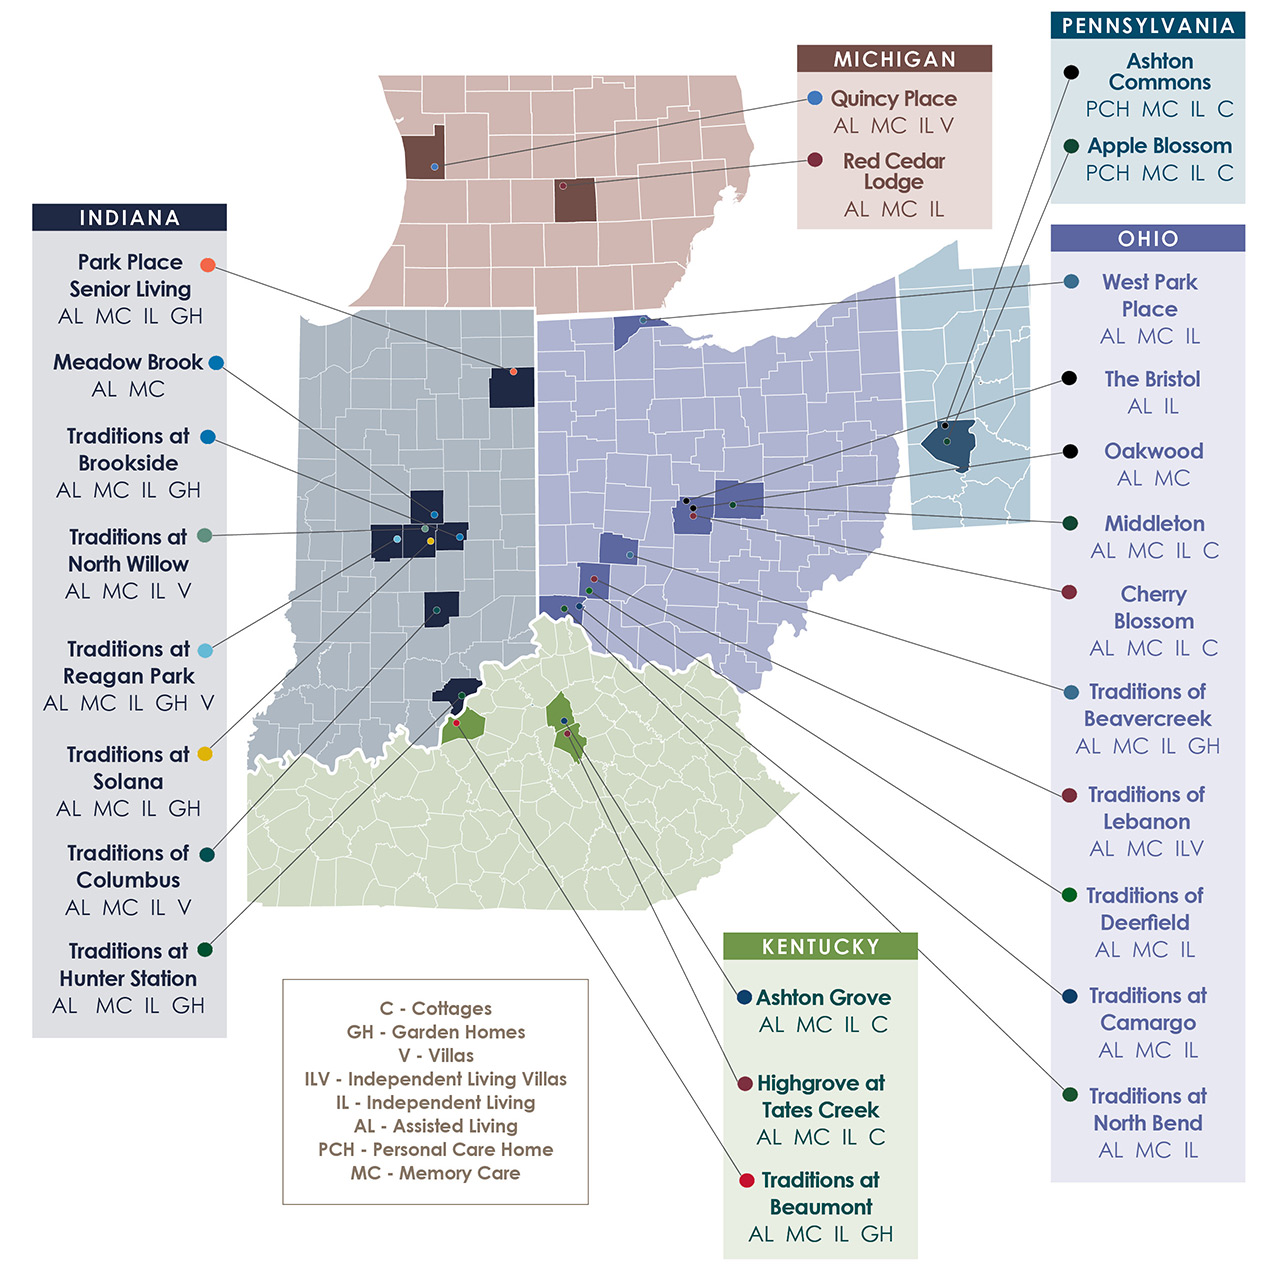 Traditions Management Community Locations Map